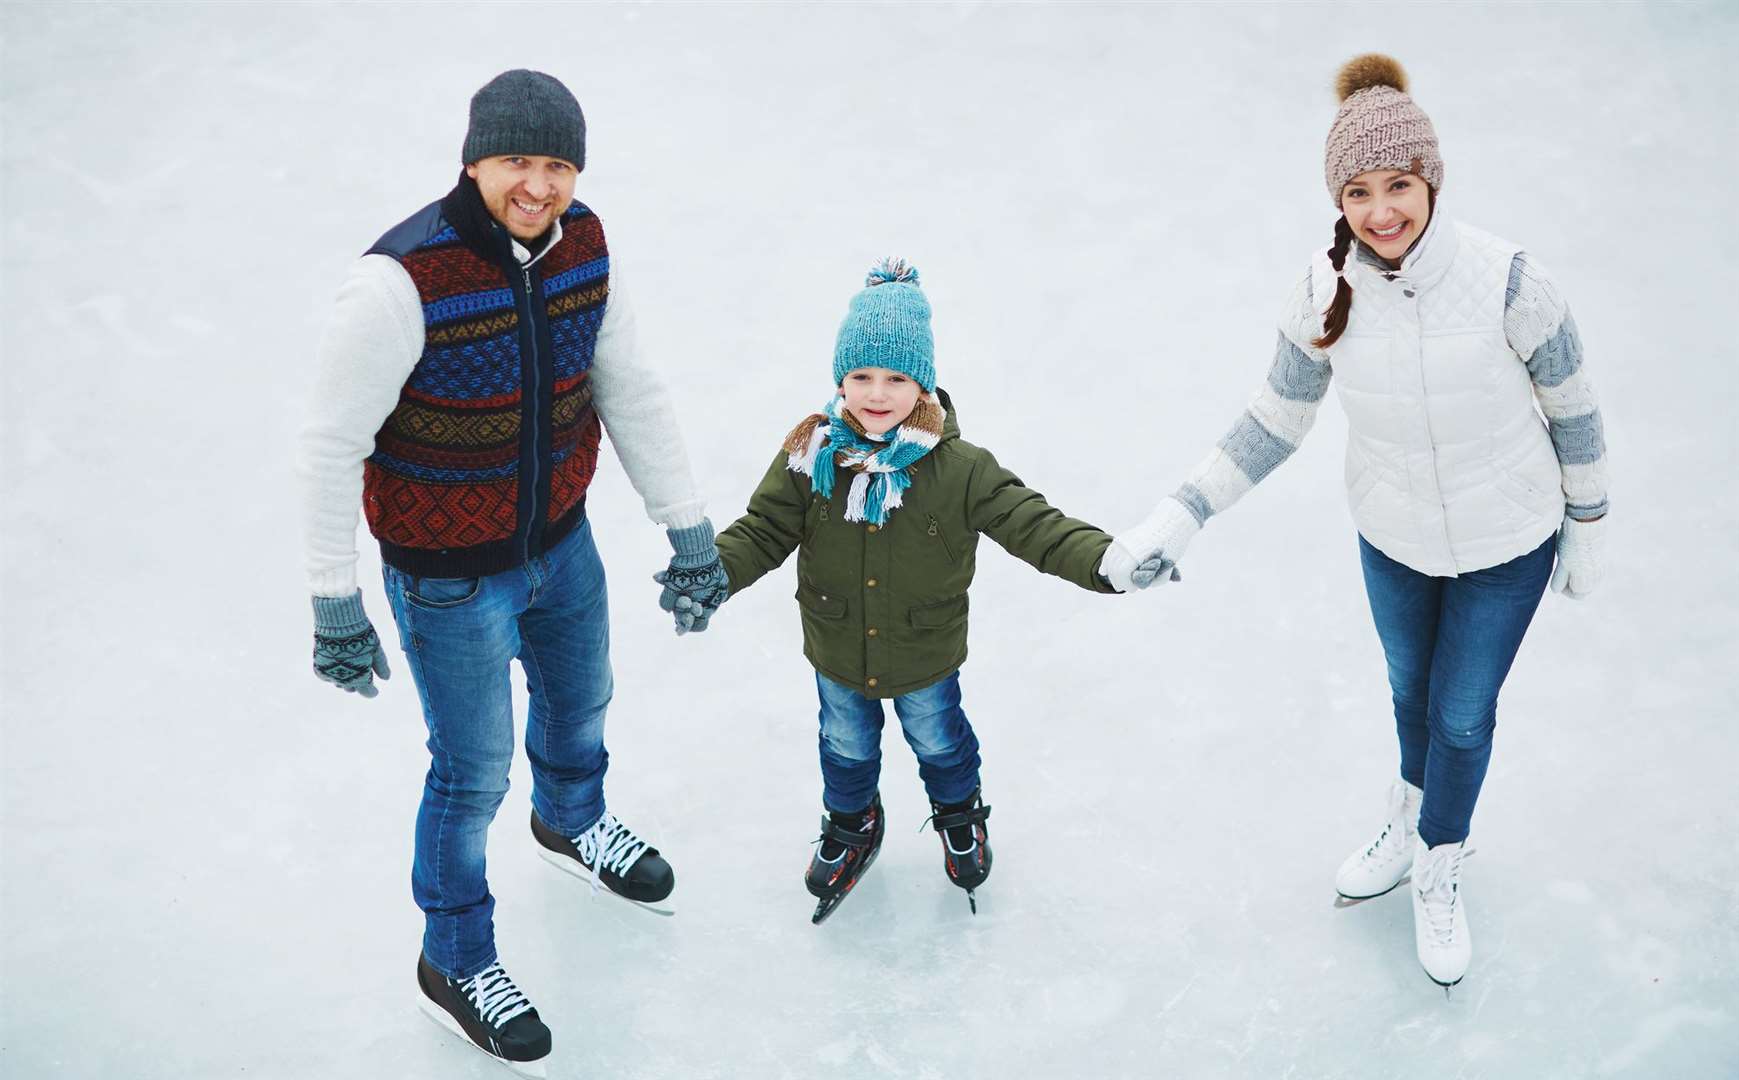 Ice skating for all ages will be on offer with SKATE Tunbridge Wells